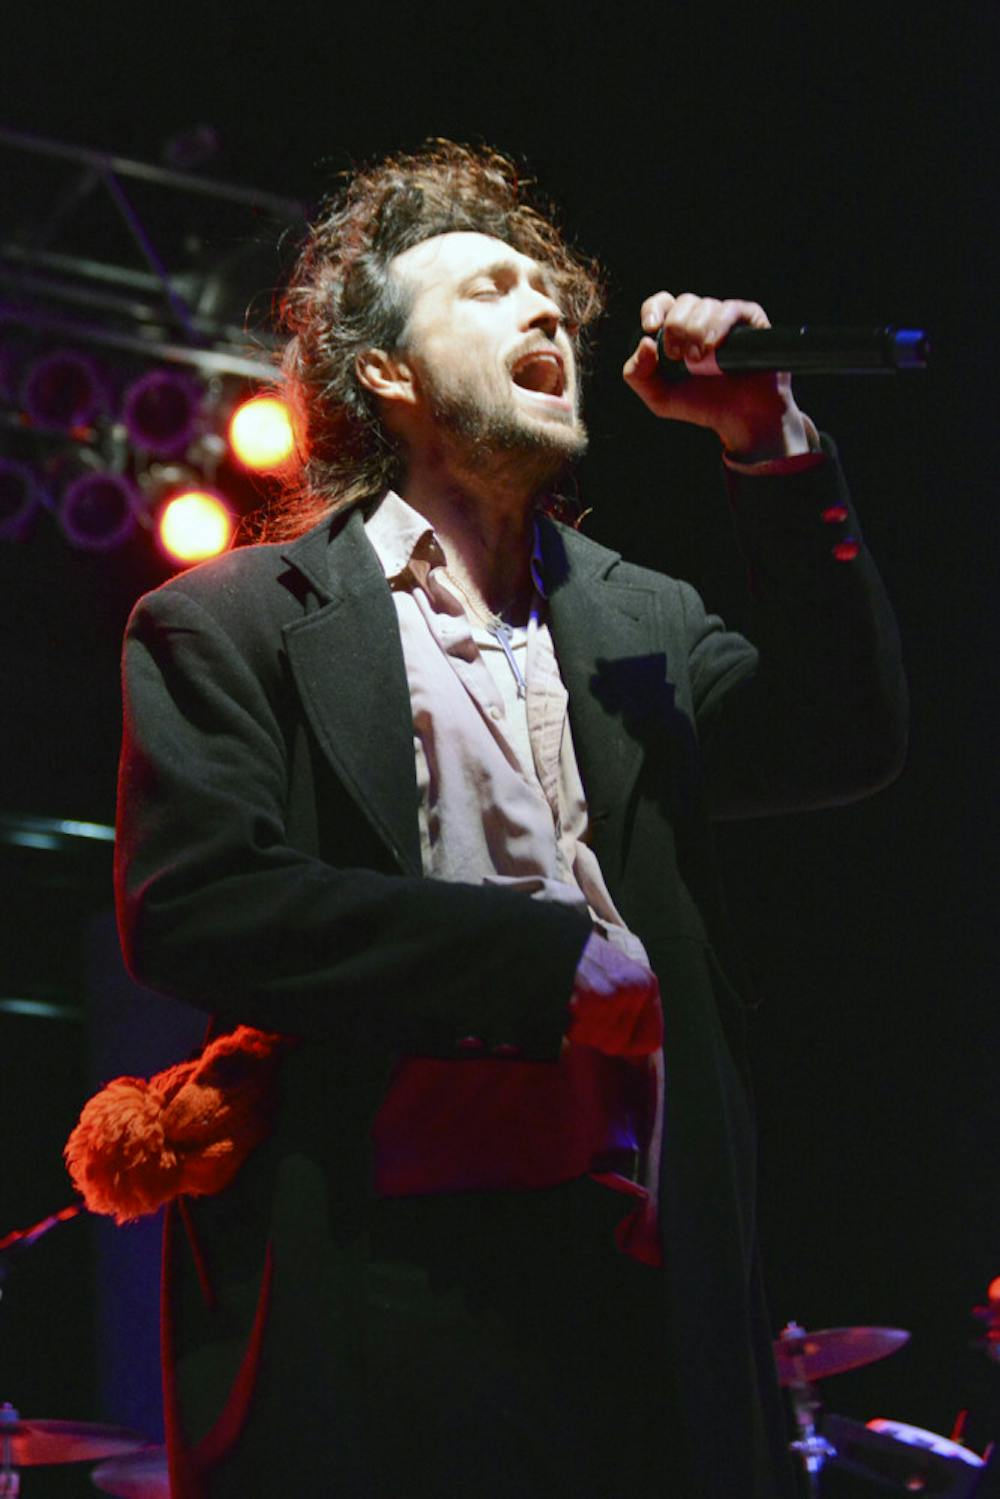 <p><span id="docs-internal-guid-60d494c0-b4e2-54cb-68f8-d085b102a95b"><span>Alex Ebert, the 36-year-old lead singer of indie folk band Edward Sharpe and the Magnetic Zeros, performs from atop the Flavet Field stage Friday night. Electronic music duo The Knocks opened the concert, which was attended by a large crowd of people despite the evening’s cold temperature.</span></span></p>